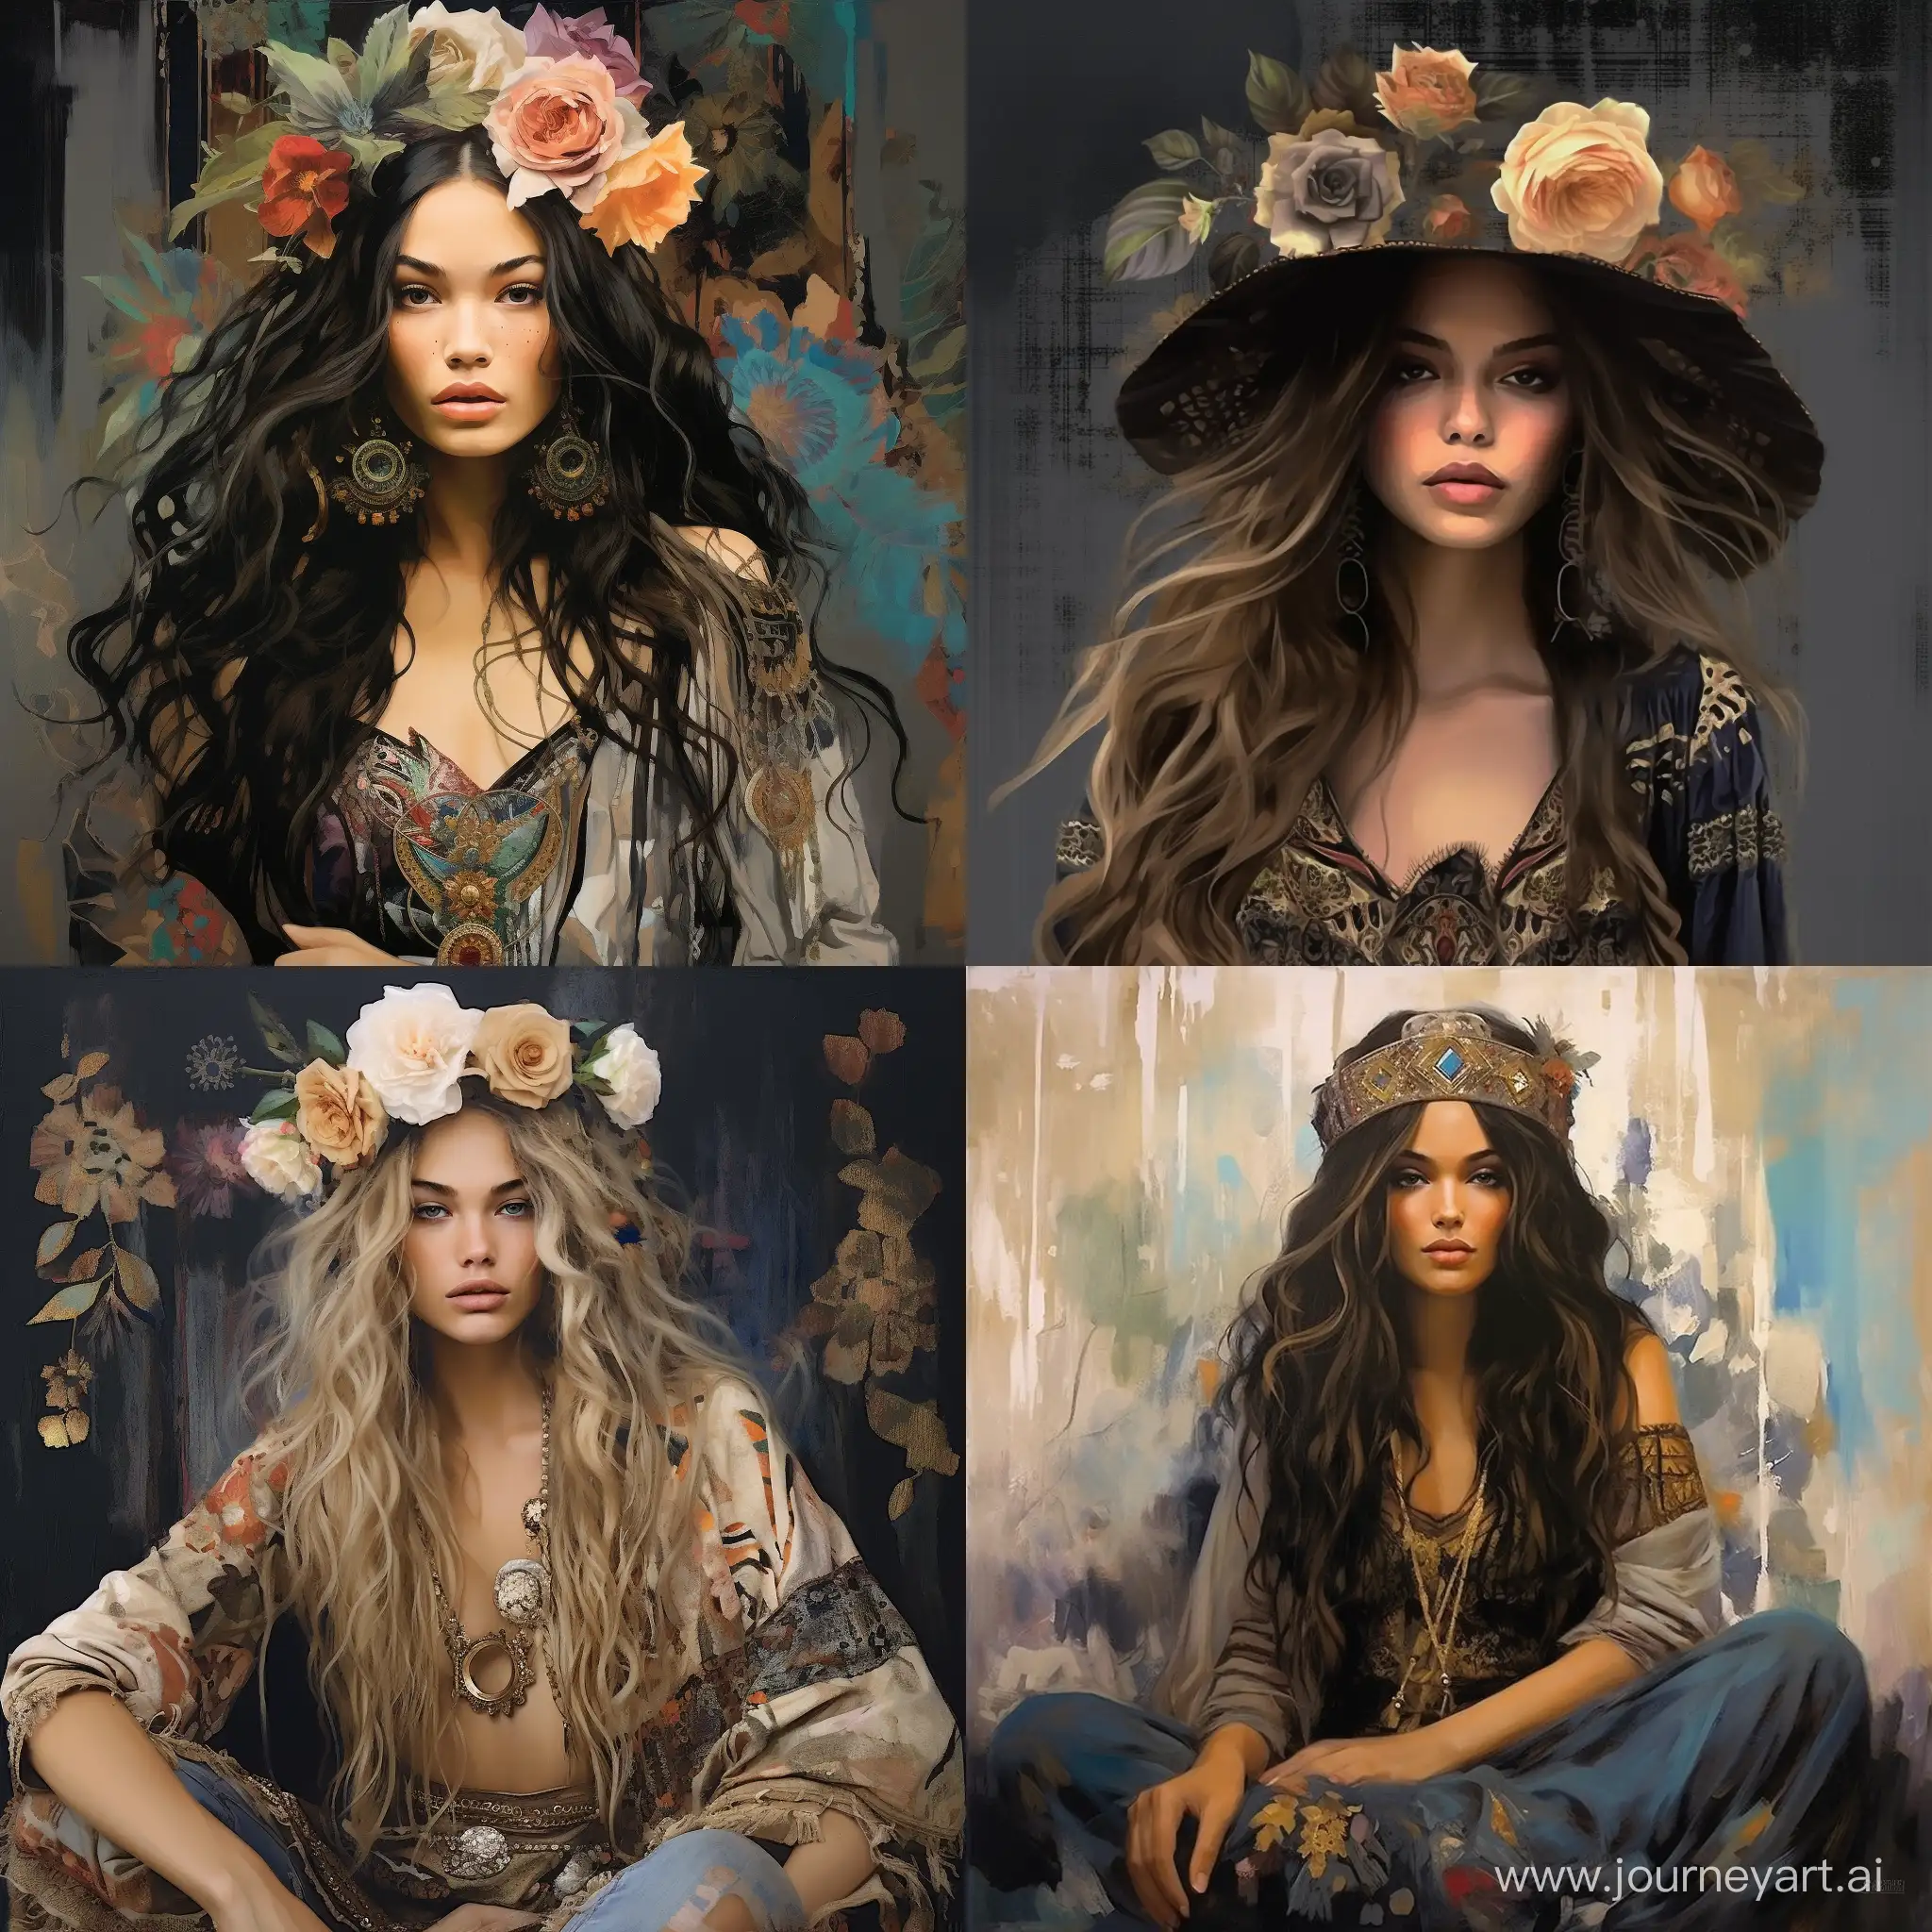 Reimagine the The Romantic Look of Boho as a captivating figure of creative expression. Experiment with unconventional angles, artistic interpretations, and imaginative elements that enhance their Bohemian style. Infuse the image with a sense of artistic flair and cultural richness, captured in a waist high portrait in a dynamic pose, Gouache painting, modern vintage style, face with boho elements, Vogue patterns, darkness, mystery, Rolf Armstrong, Paul Poiret, Margaret Keane influence, Great Gatsby-inspired, pheasant cloche, fur stole, captivating gaze, hijab, angelic fury, fiery wings in red, black, gold, semi-realistic fashion illustration, faceless woman, Santa outfit, black hair with red tips, back-view, white backdrop, scattered Christmas balls,